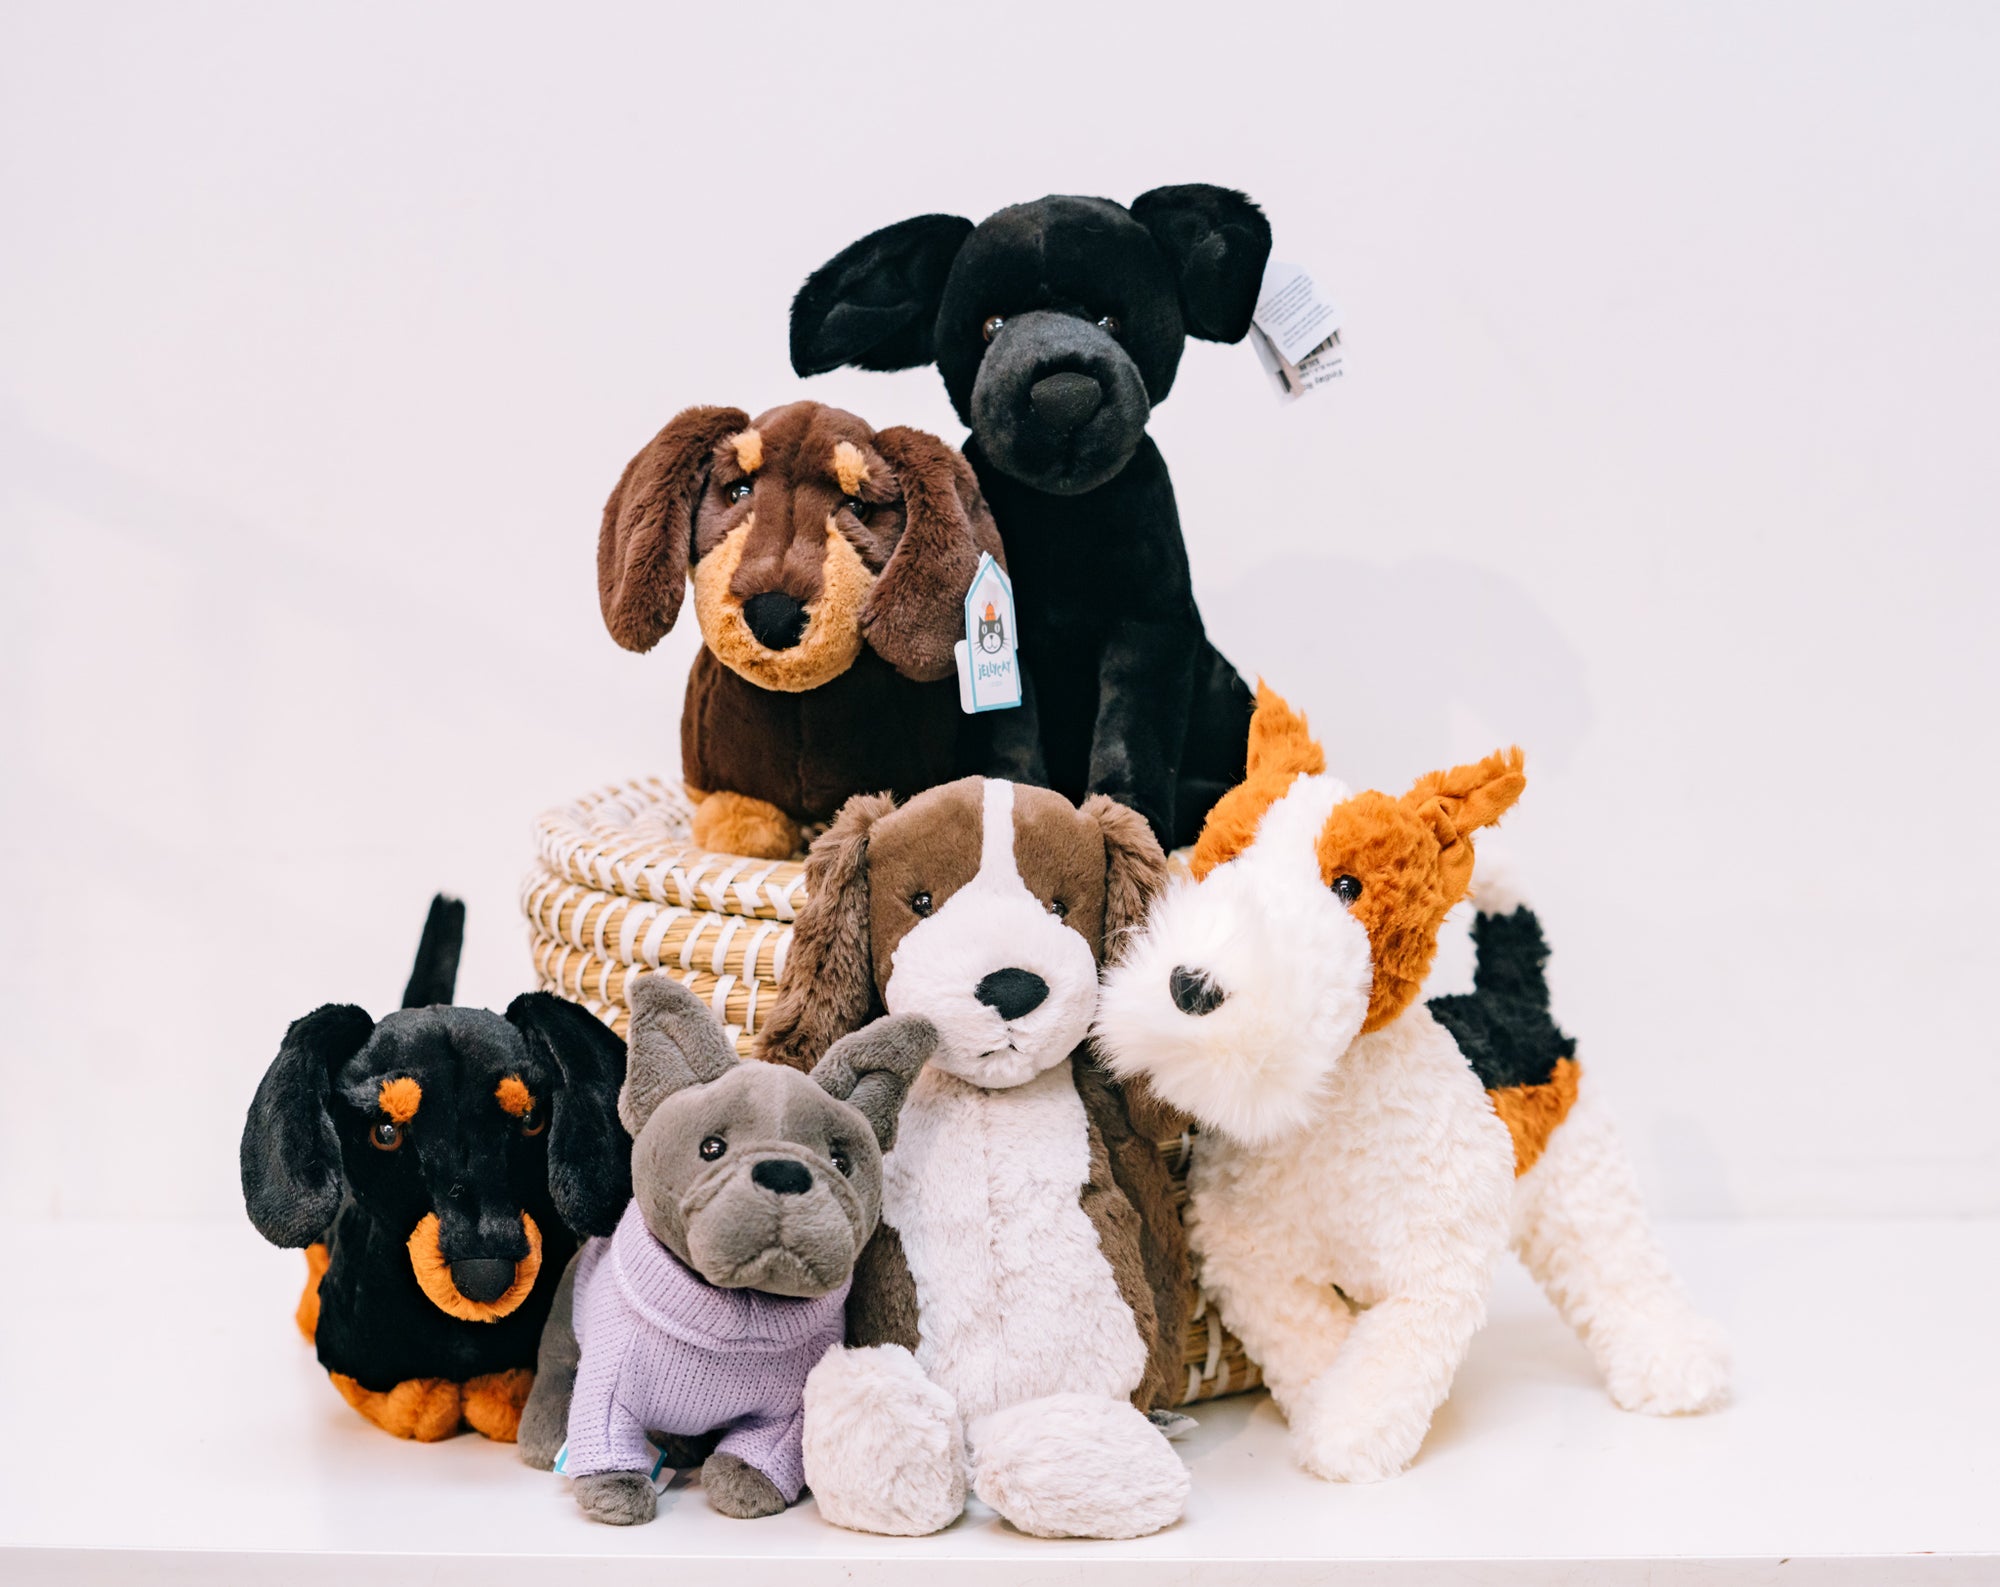 Jellycat: Where Whimsy Meets Softness, Crafting Cuddly Dreams Since 1999